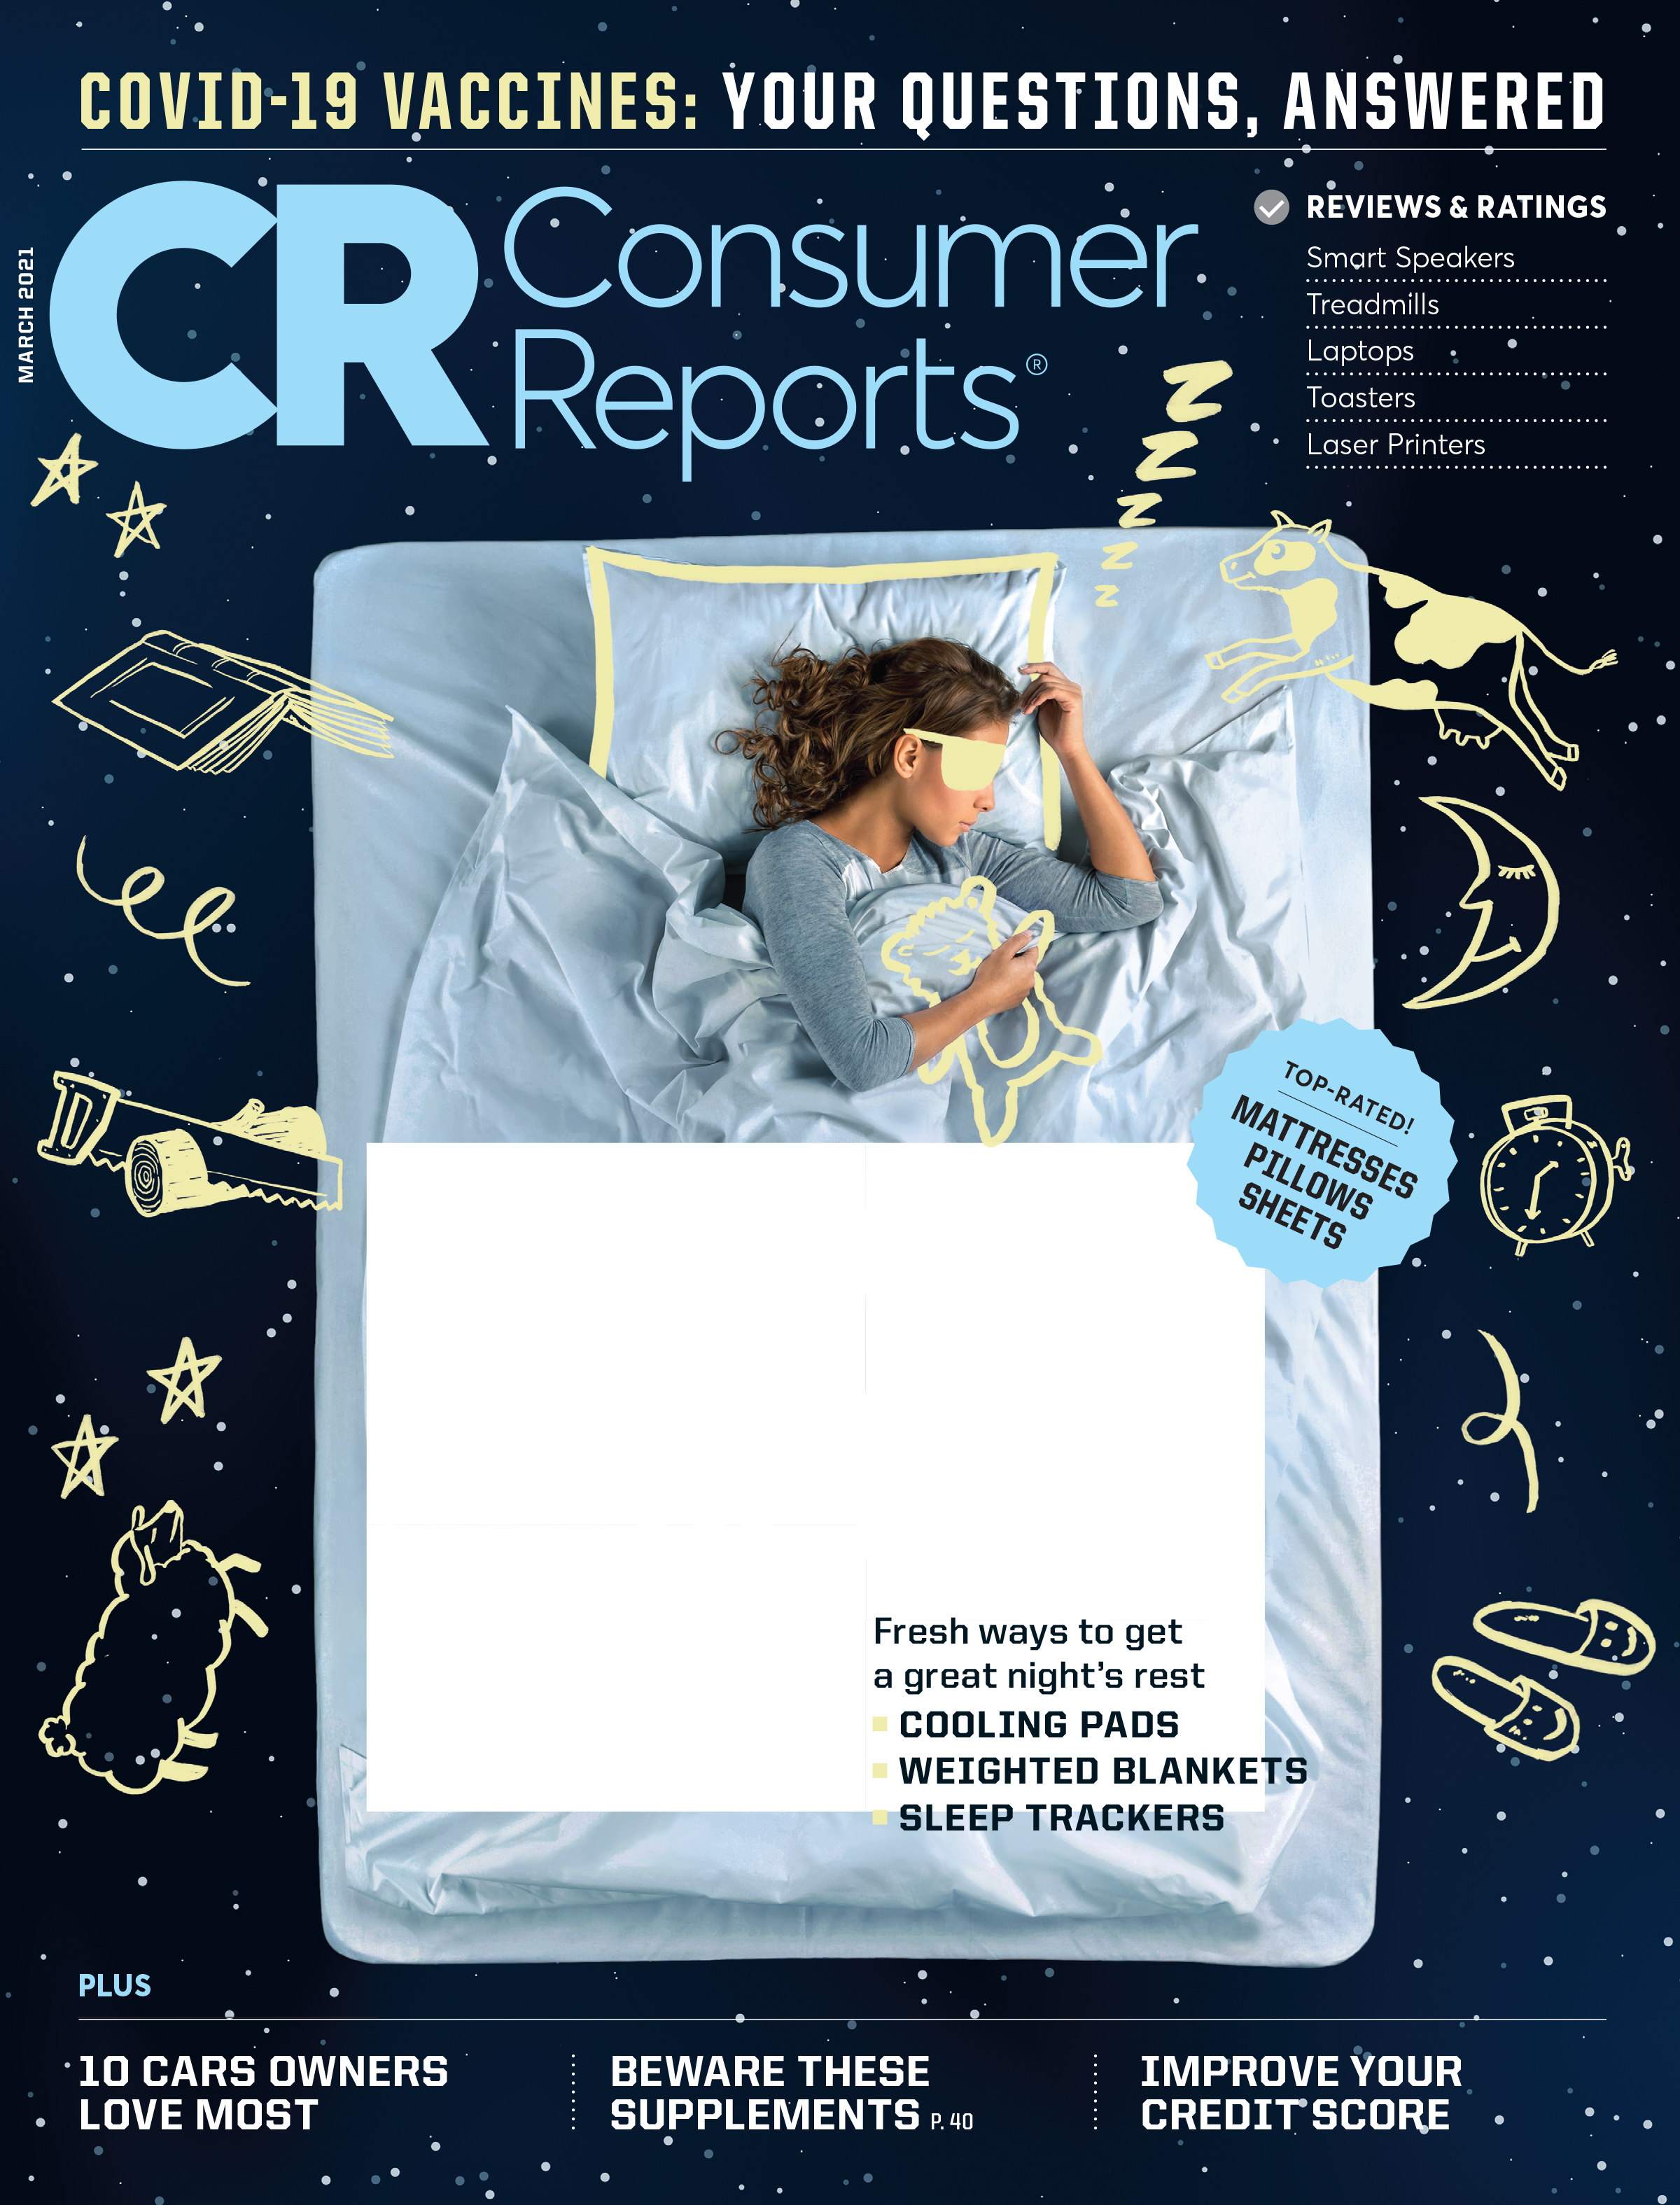 Consumer Reports - "Fresh Ways to Get a Great Night's Rest," March 2021